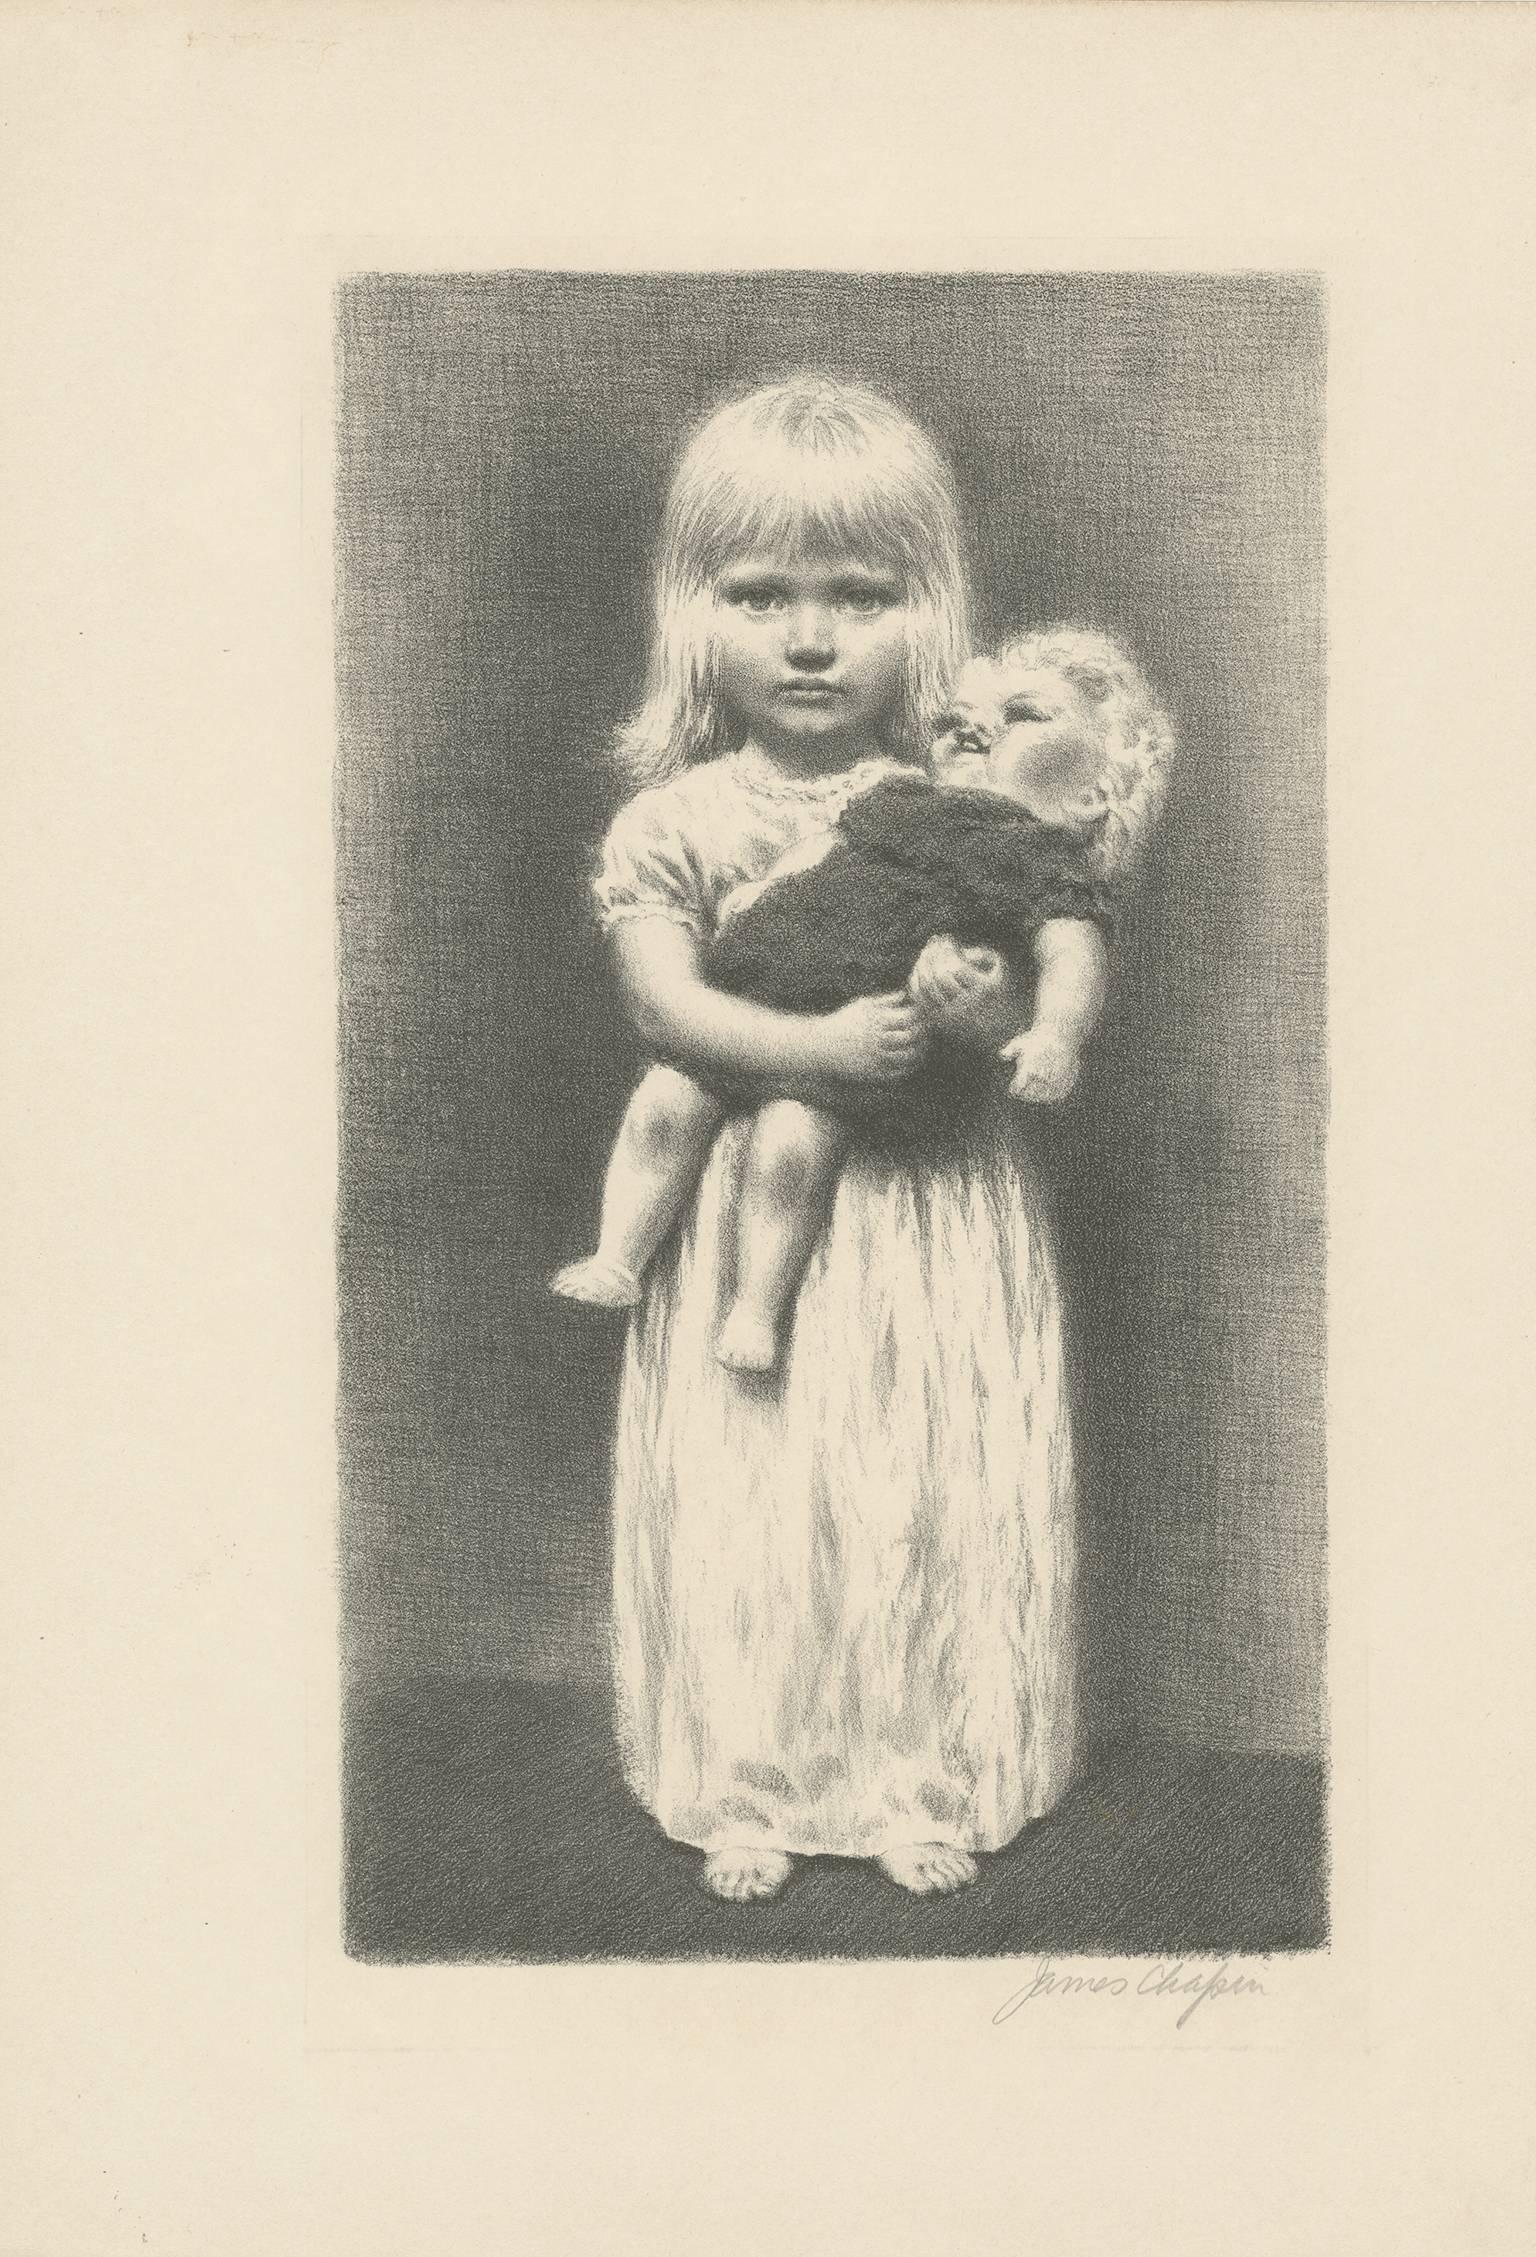 James Ormsbee Chapin Figurative Print - 20th century lithograph figurative print child subject doll realistic signed